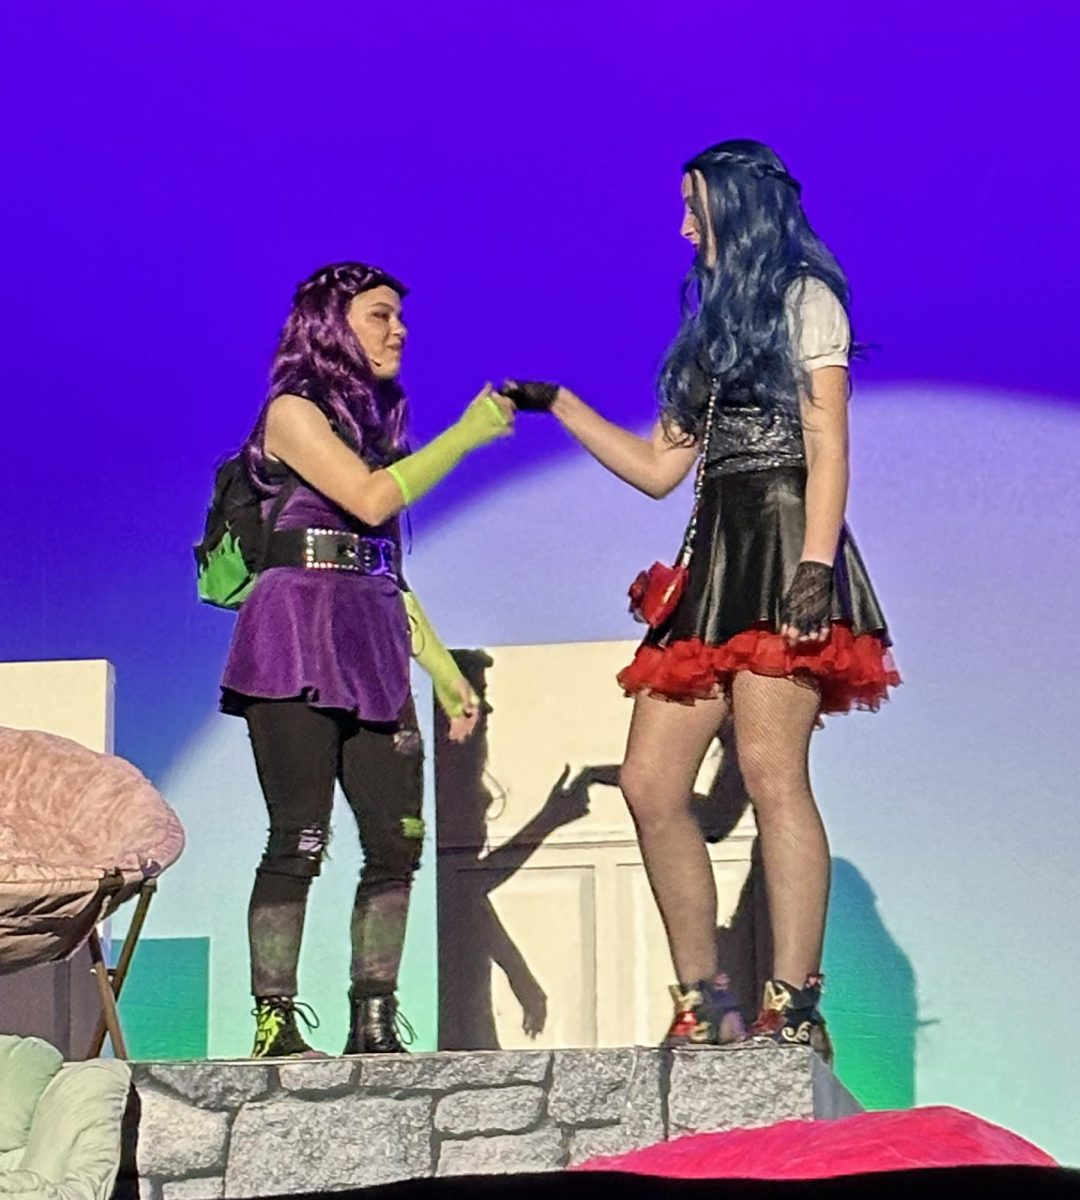 Mal and Evie, daughter of Grimhilde, played by sophomore Naomi Dekleva, prepare to go their separate ways.